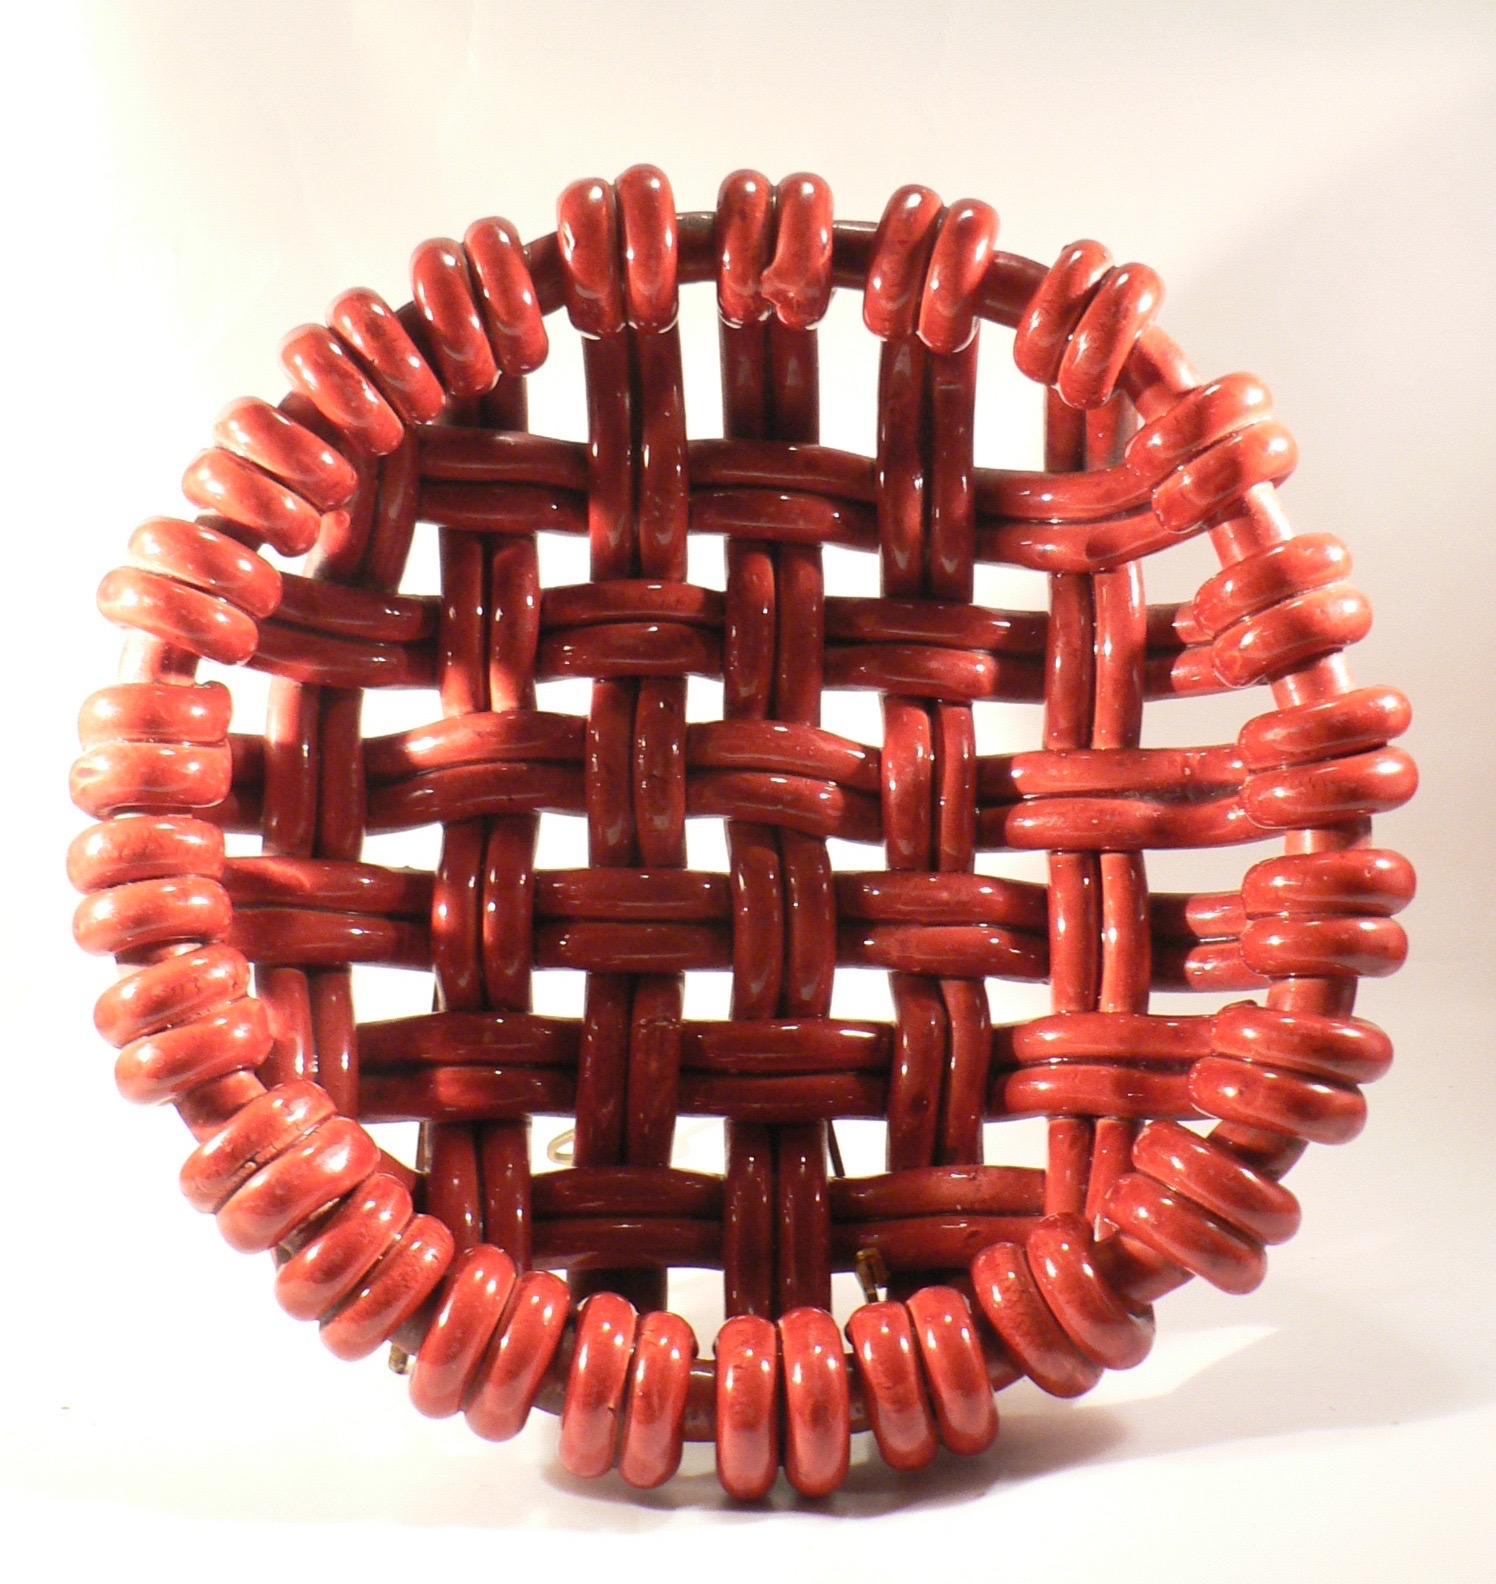 Beautiful fruit bowl or centerpiece in braided enameled ceramic in the style of Jérôme Massier dating from the 1950s, produced in Vallauris, France.

This bowl is covered with a very deep red glaze! Its dimensions are ideal and practical. It